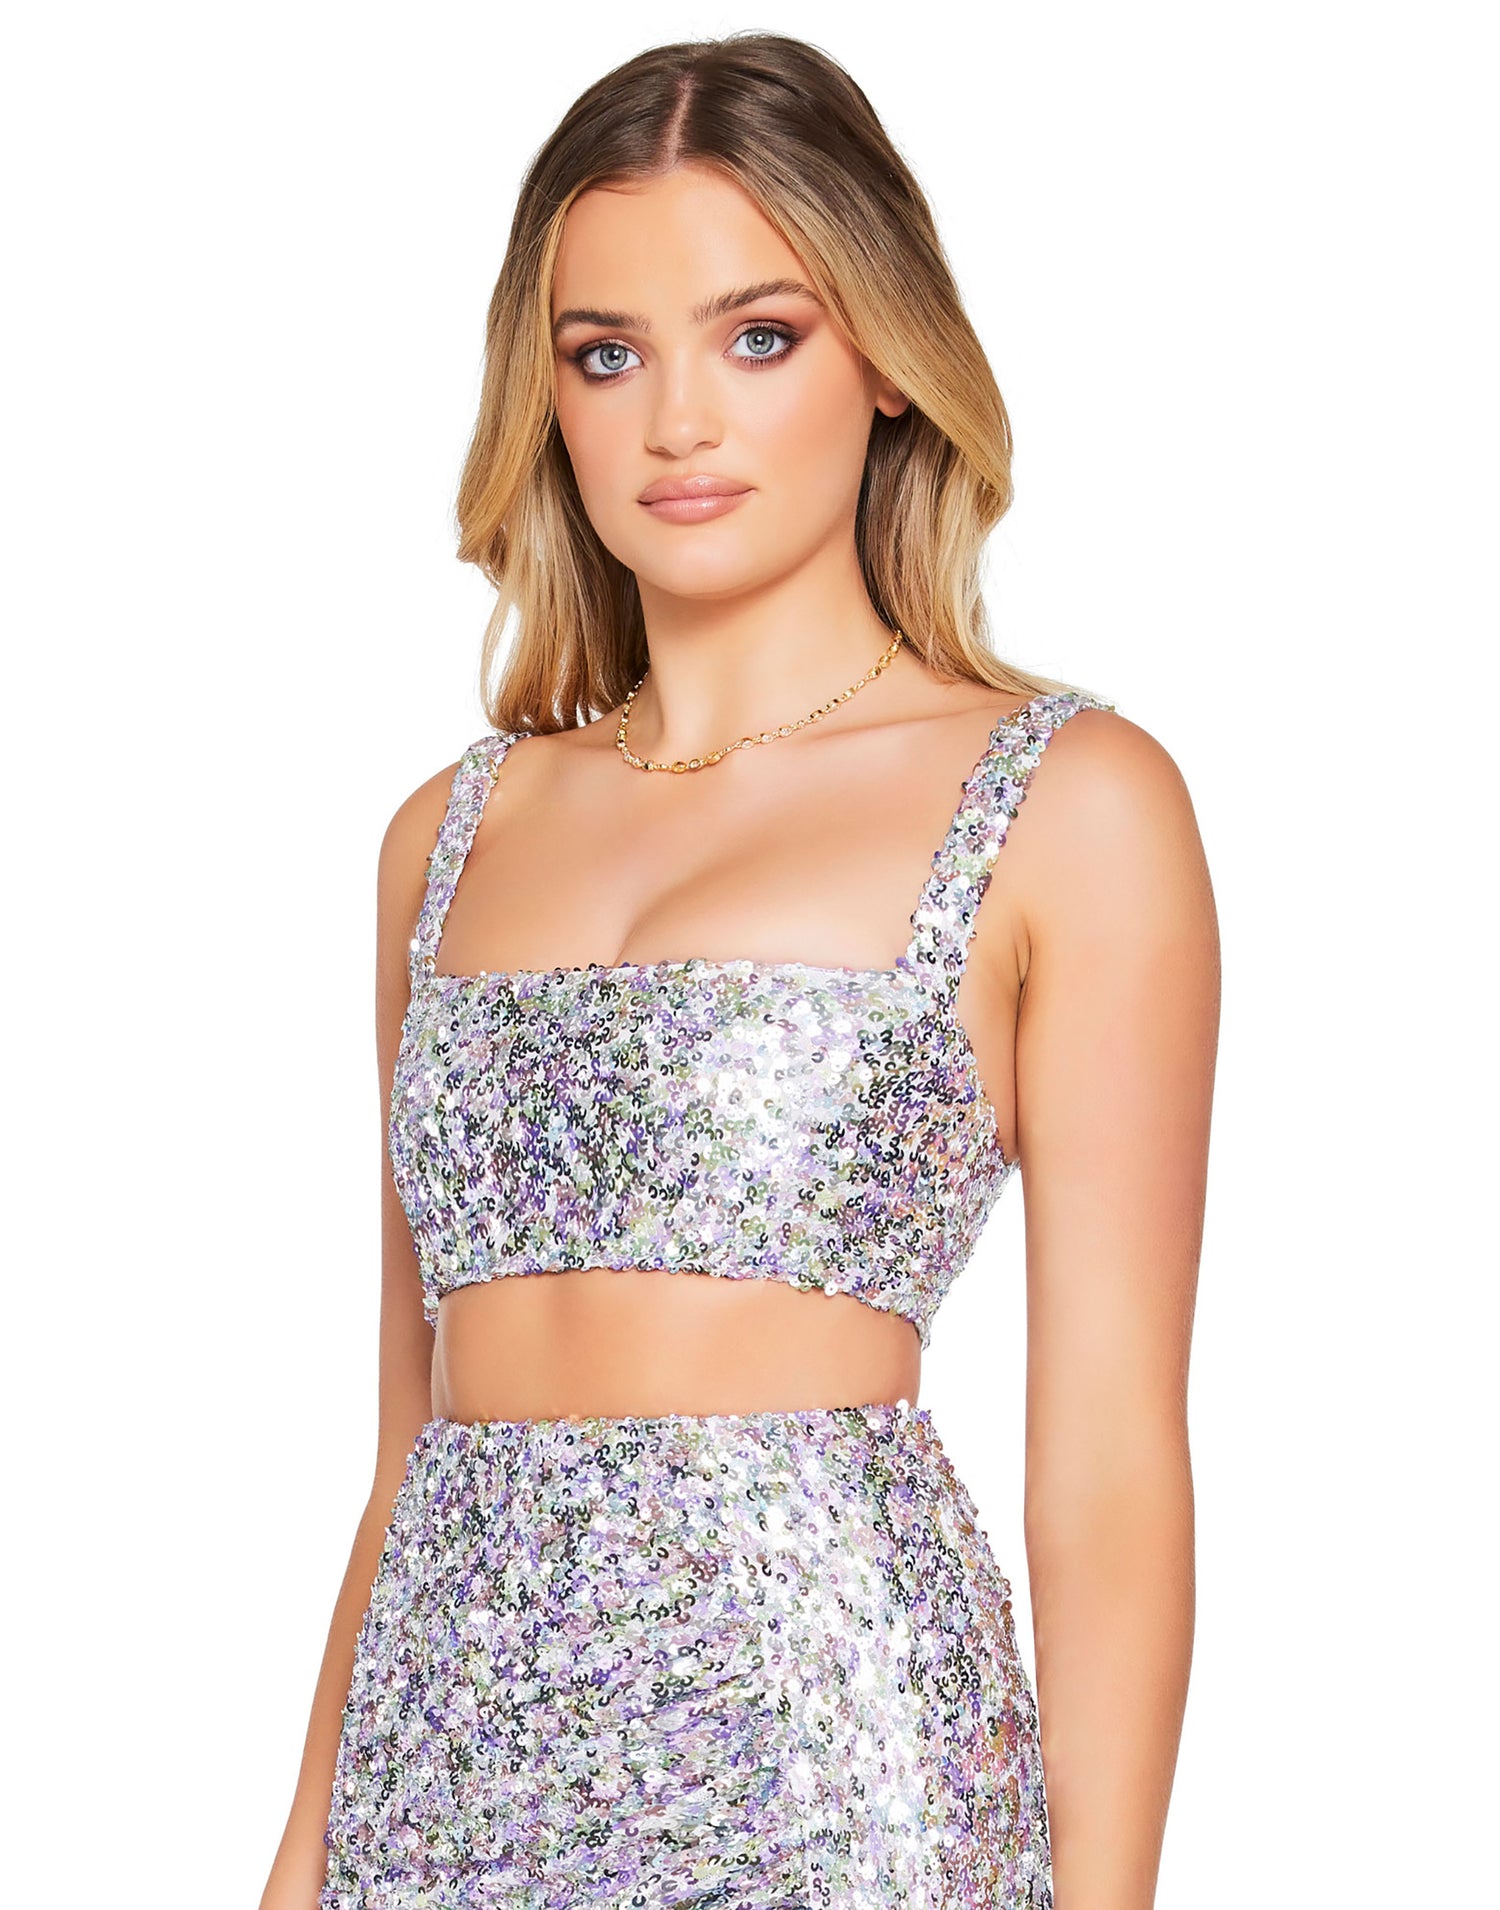 Luma Sequins Crop Top by Nookie in Pastel - Angled View